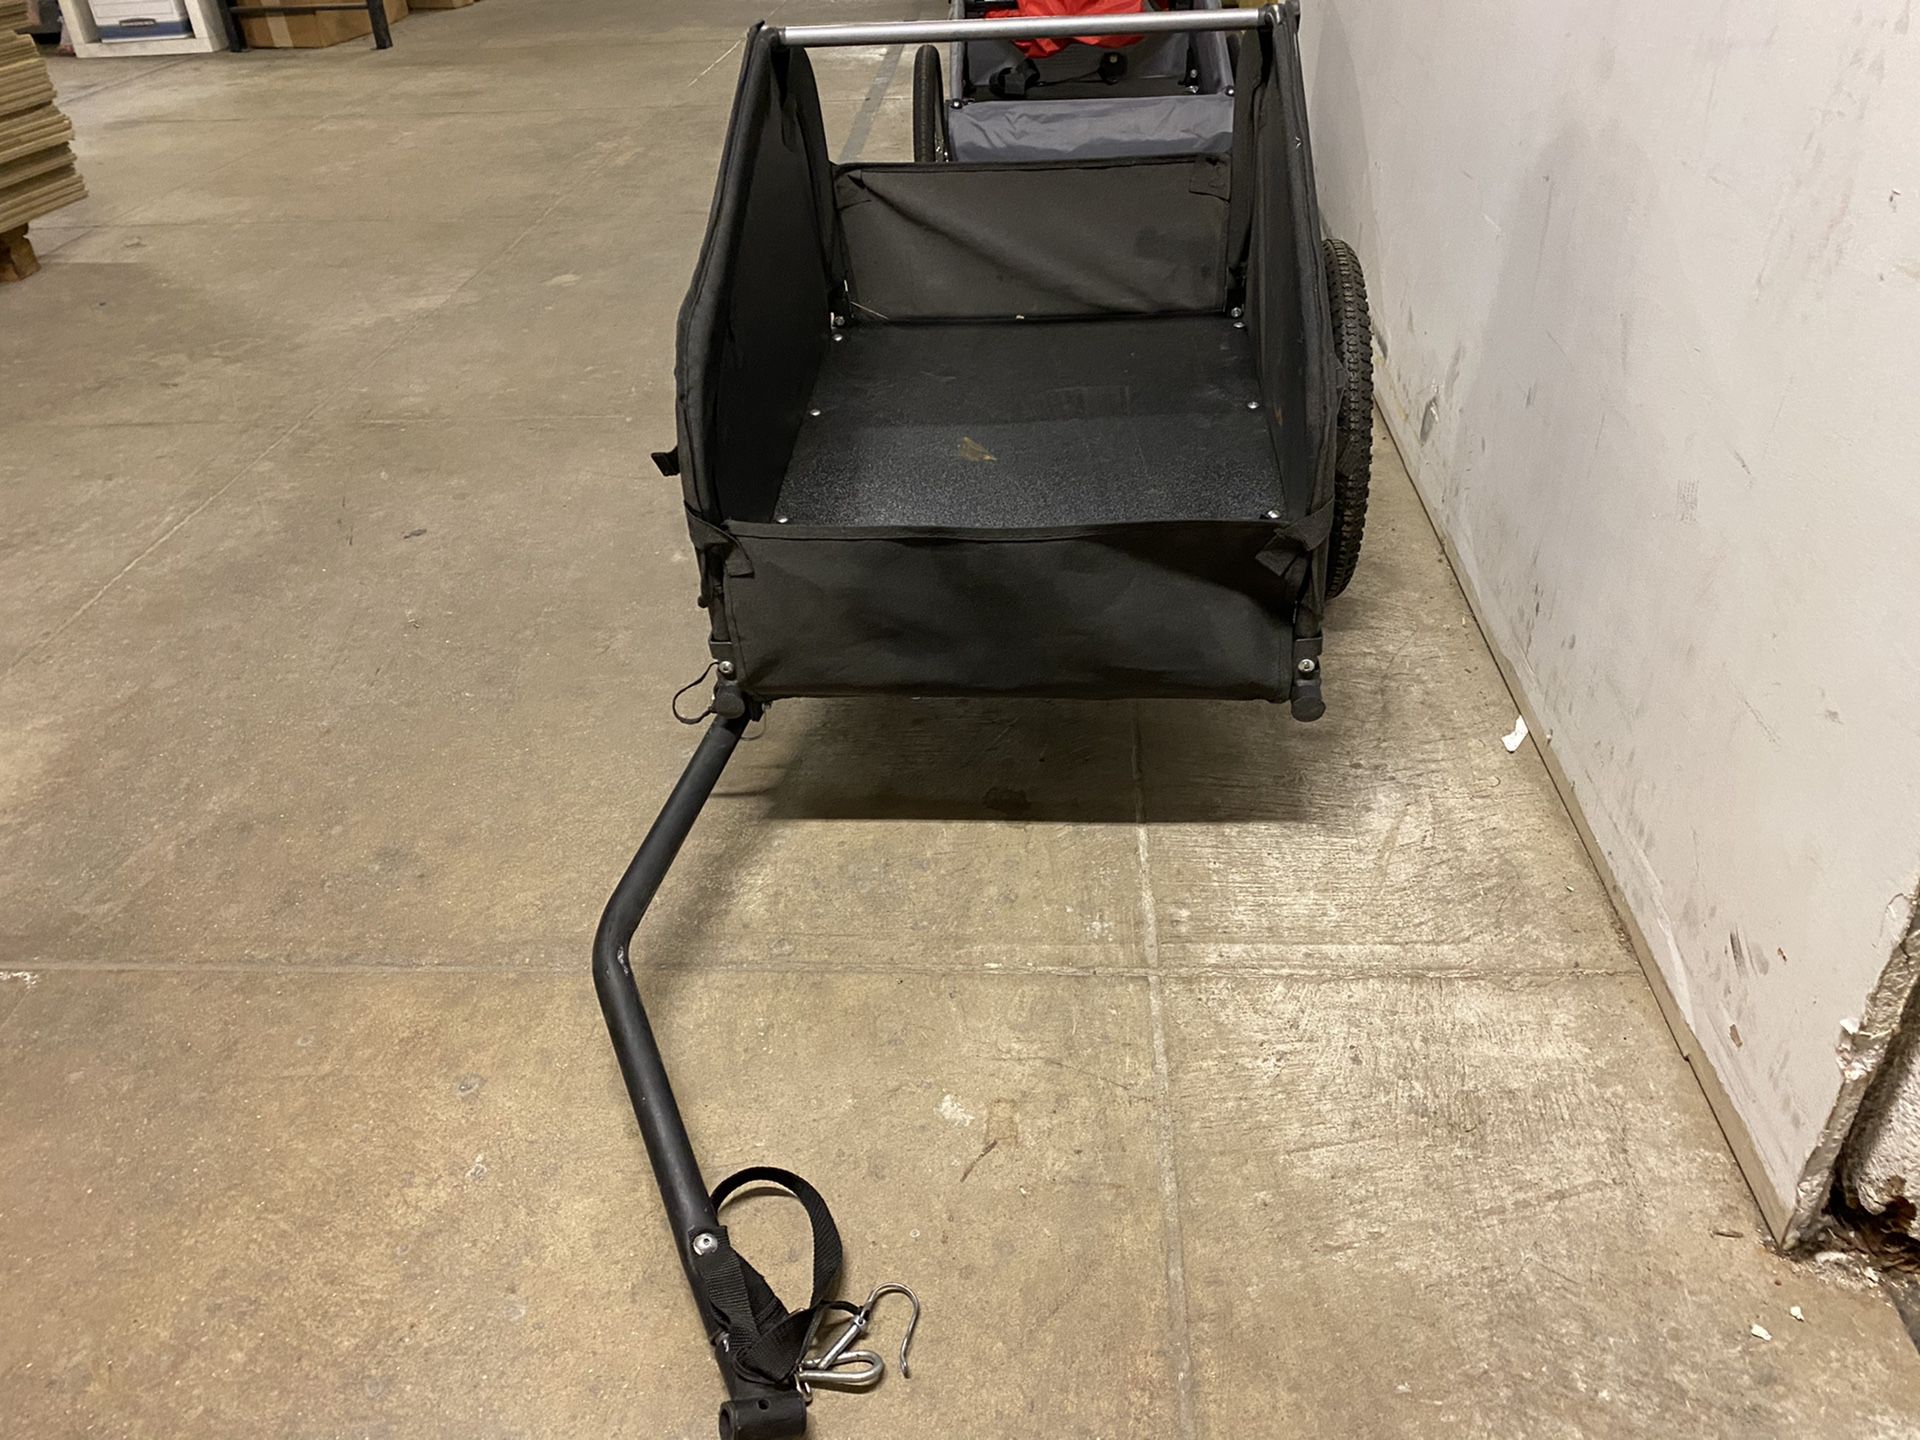 Barley used bike trailer. Great condition. Durable and light weight.